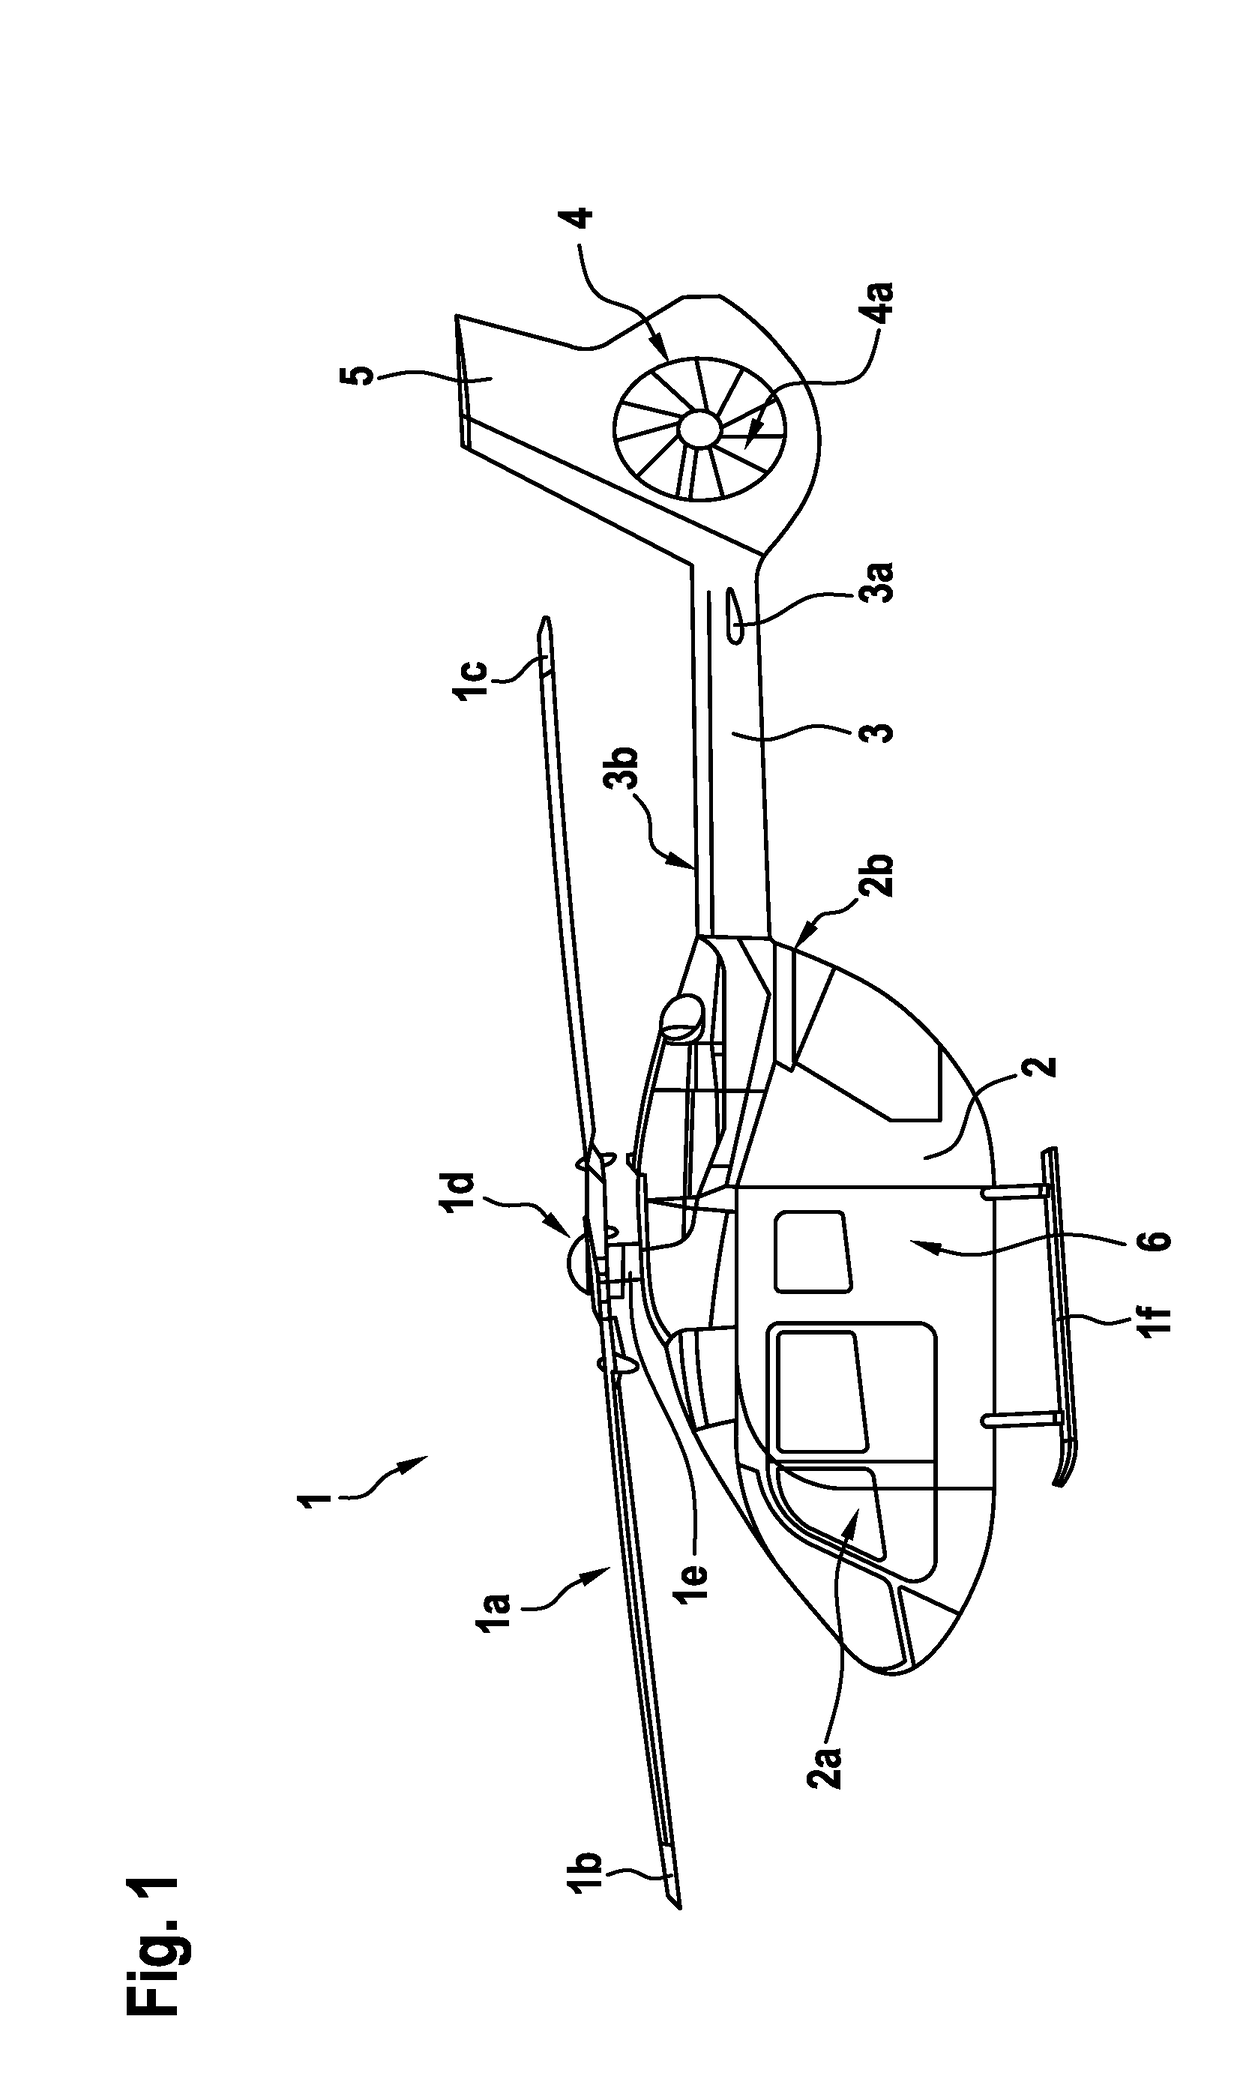 Rotary wing aircraft with a fuselage that comprises at least one structural stiffened panel